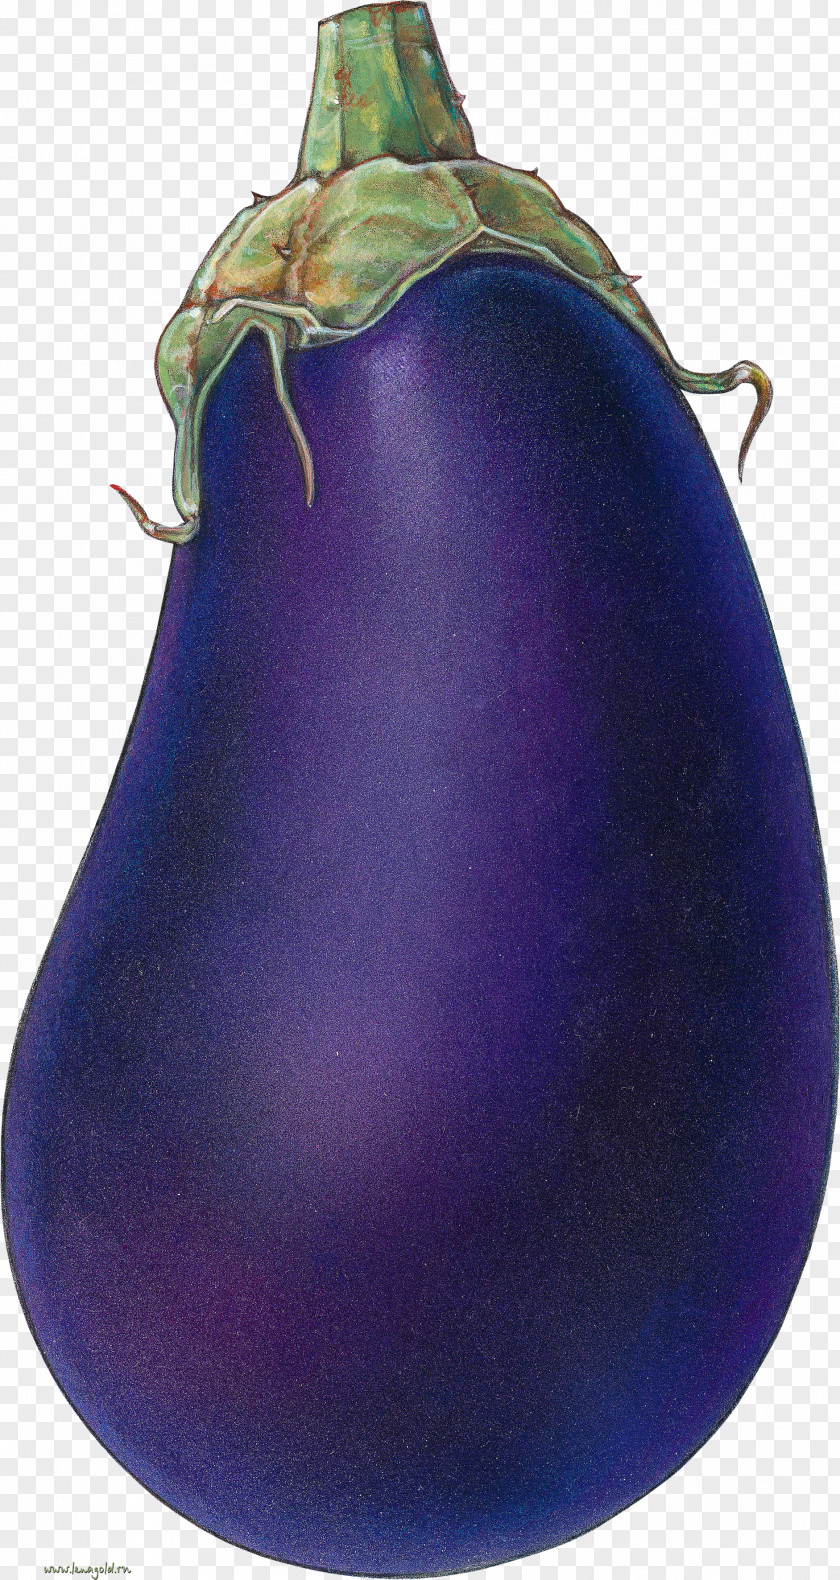 Vegetable Fruit Eggplant Painting Drawing PNG